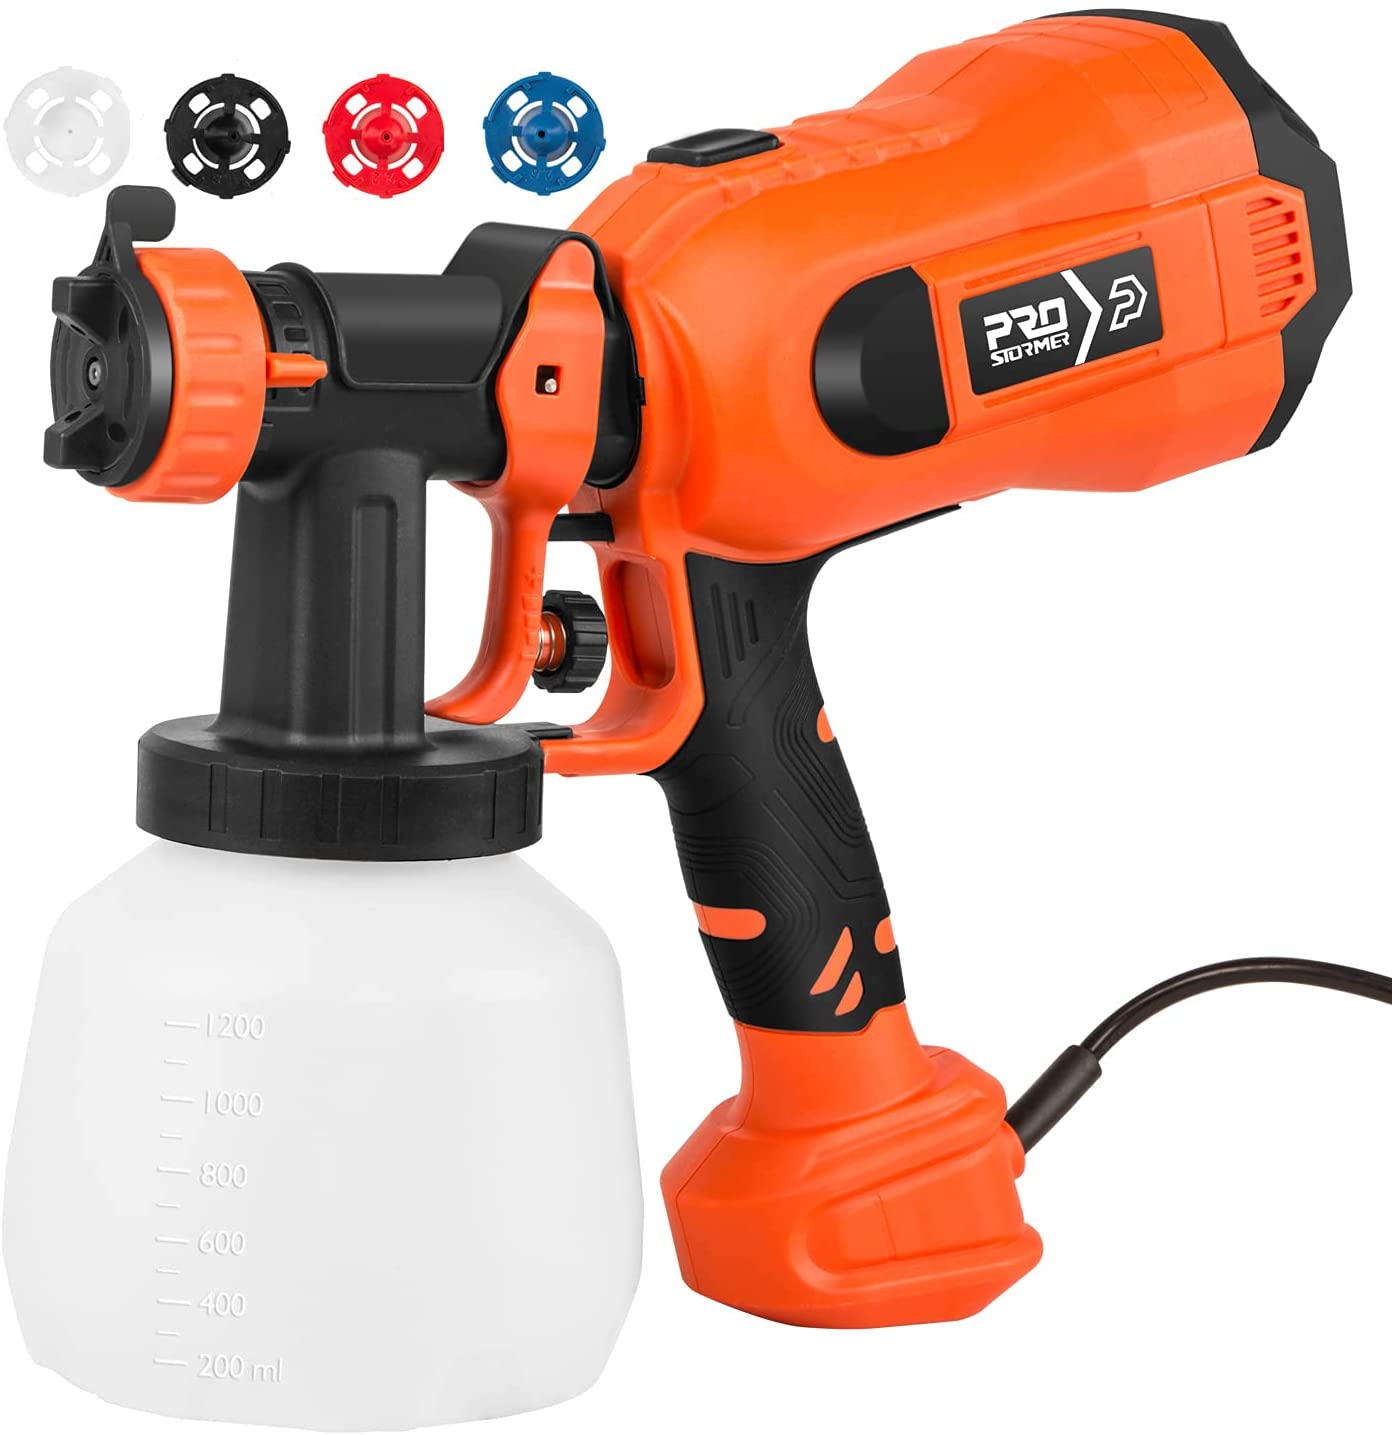 750W Spray Gun, 4 Nozzles High Power HVLP Paint Sprayer, 1200ml Container, Easy Spraying and Cleaning for DIY/Home improvement/Wall Painting by